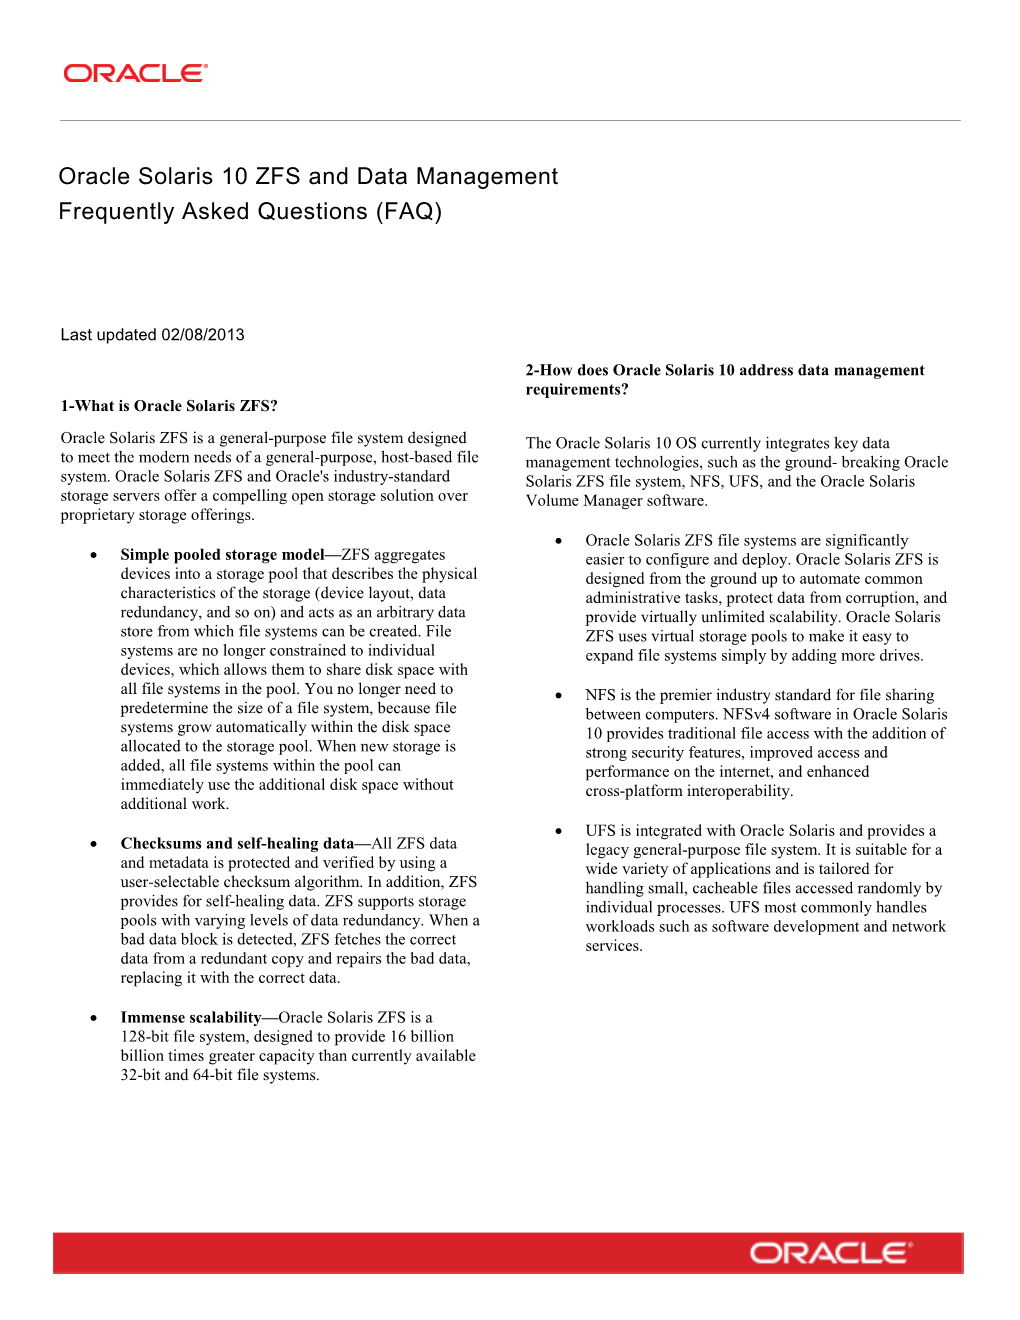 Data Management and Oracle Solaris